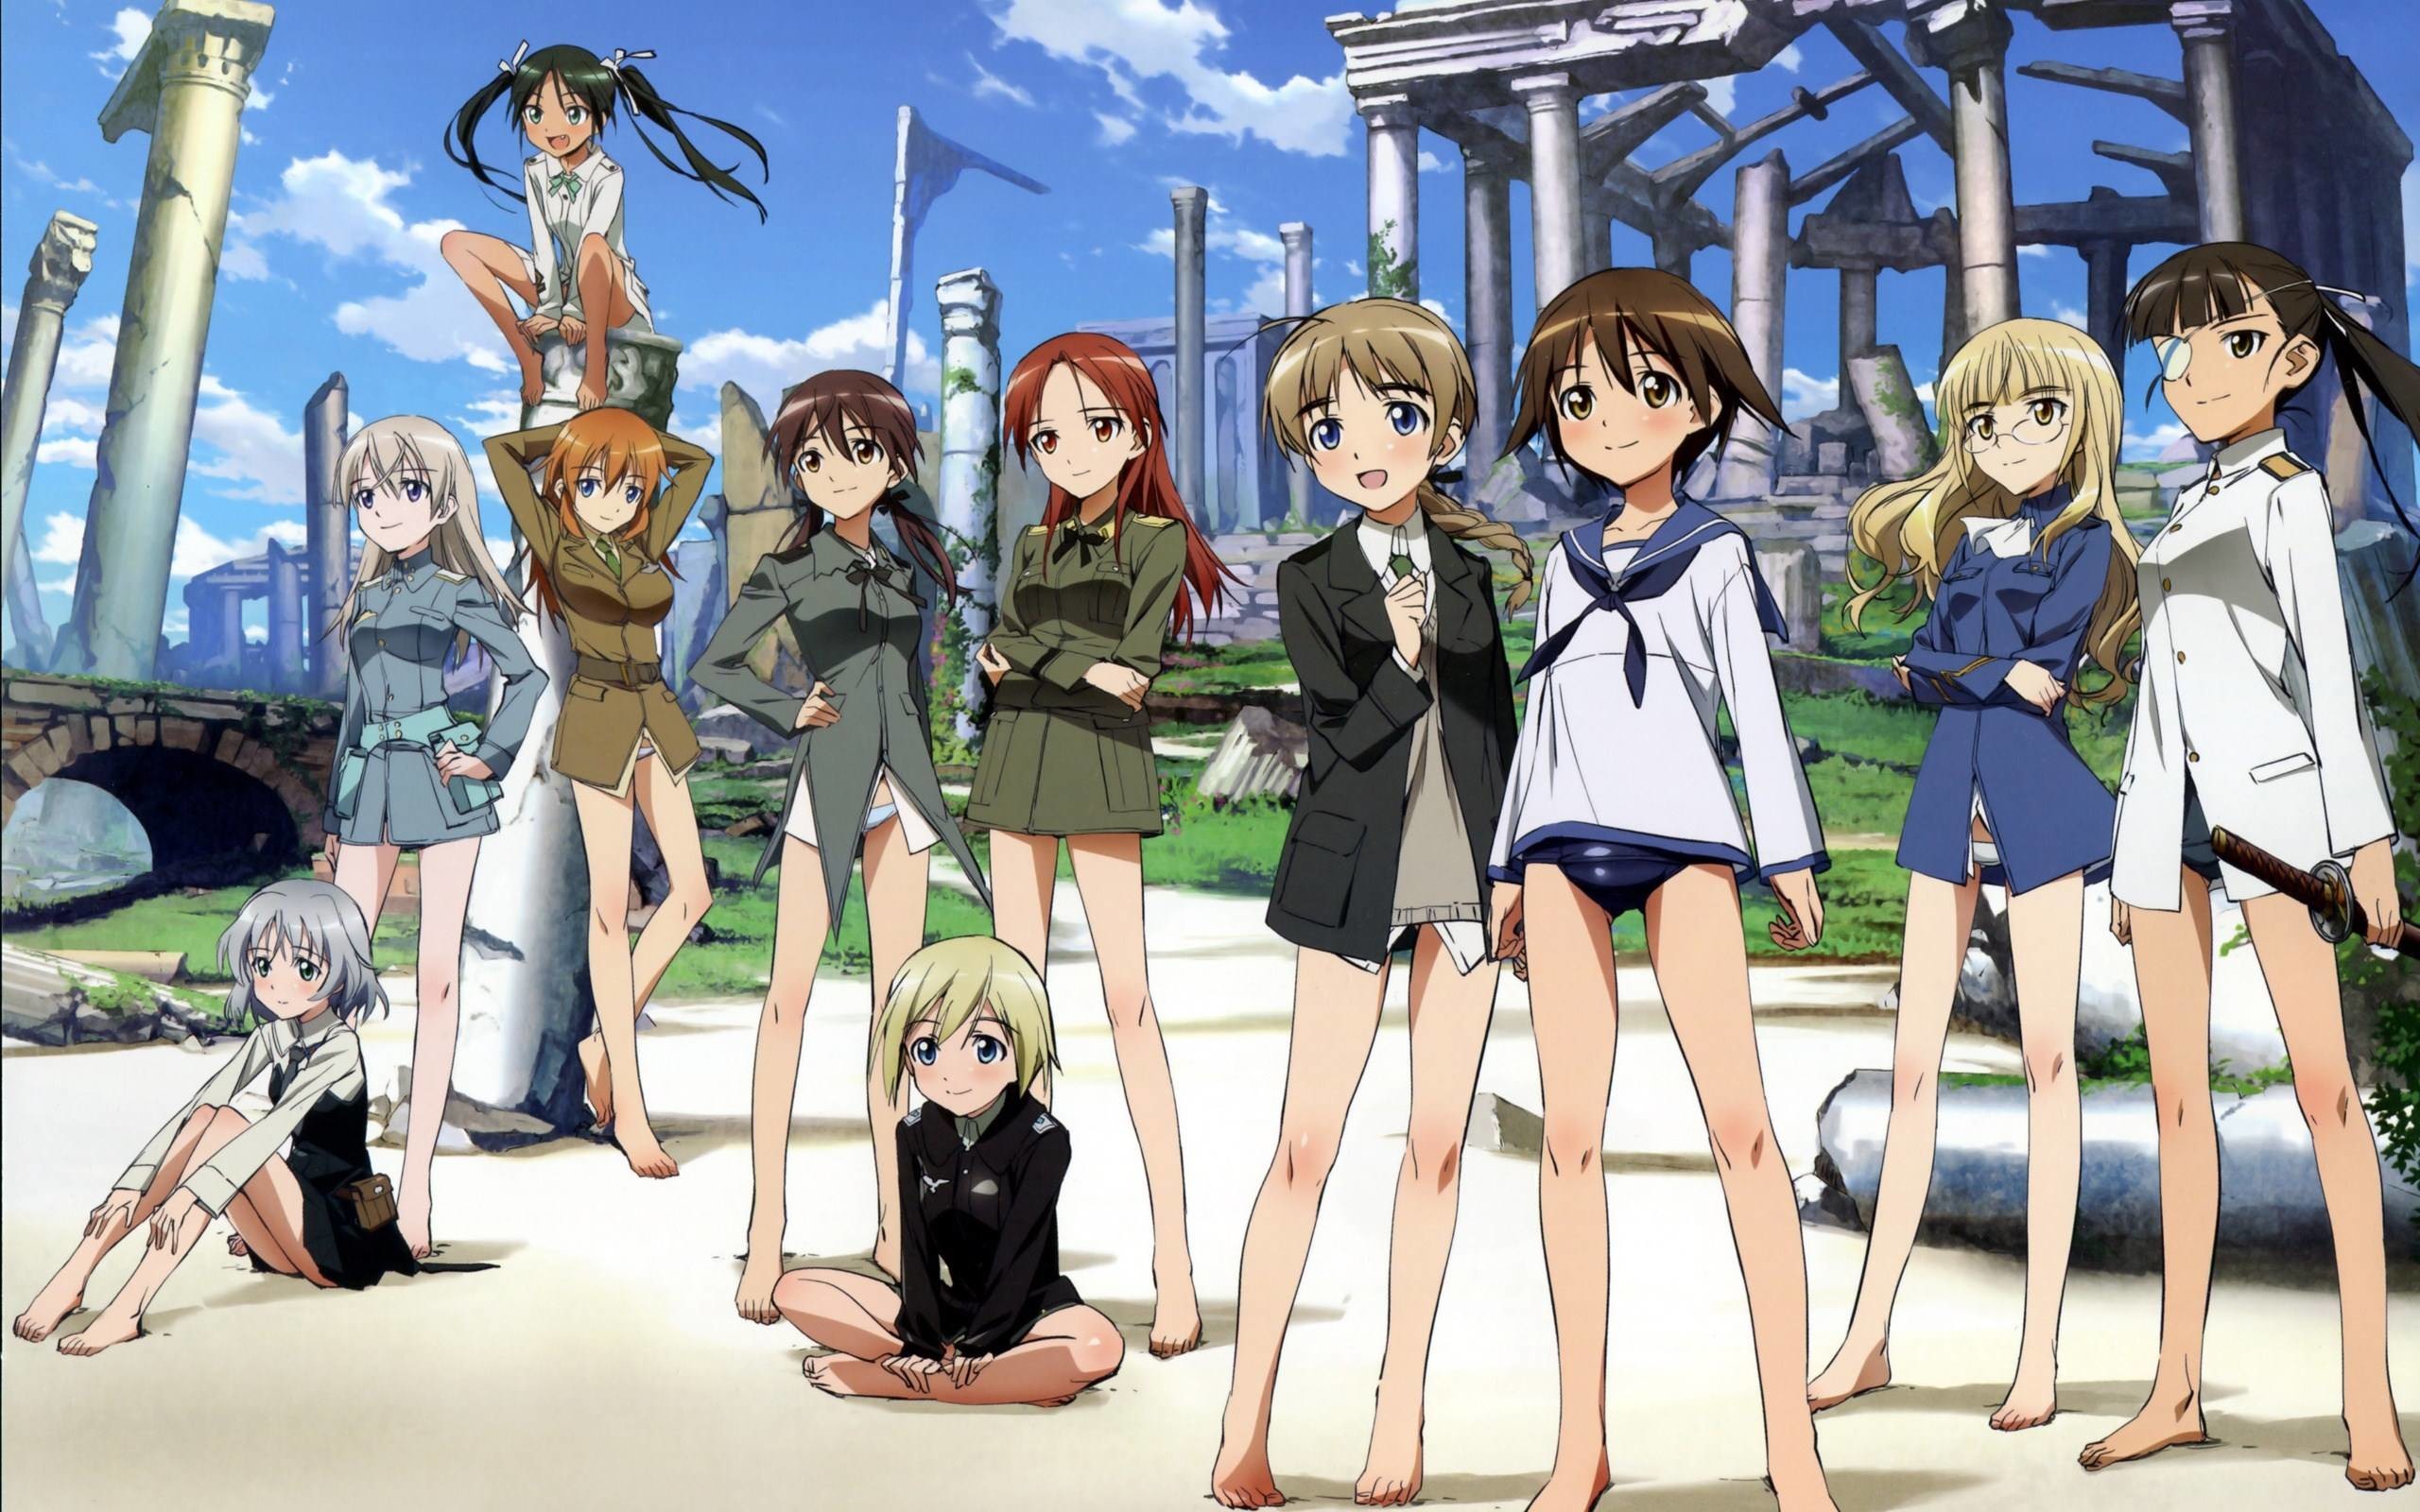 2560x1600 Strike Witches - What was the storyline again?! - Review